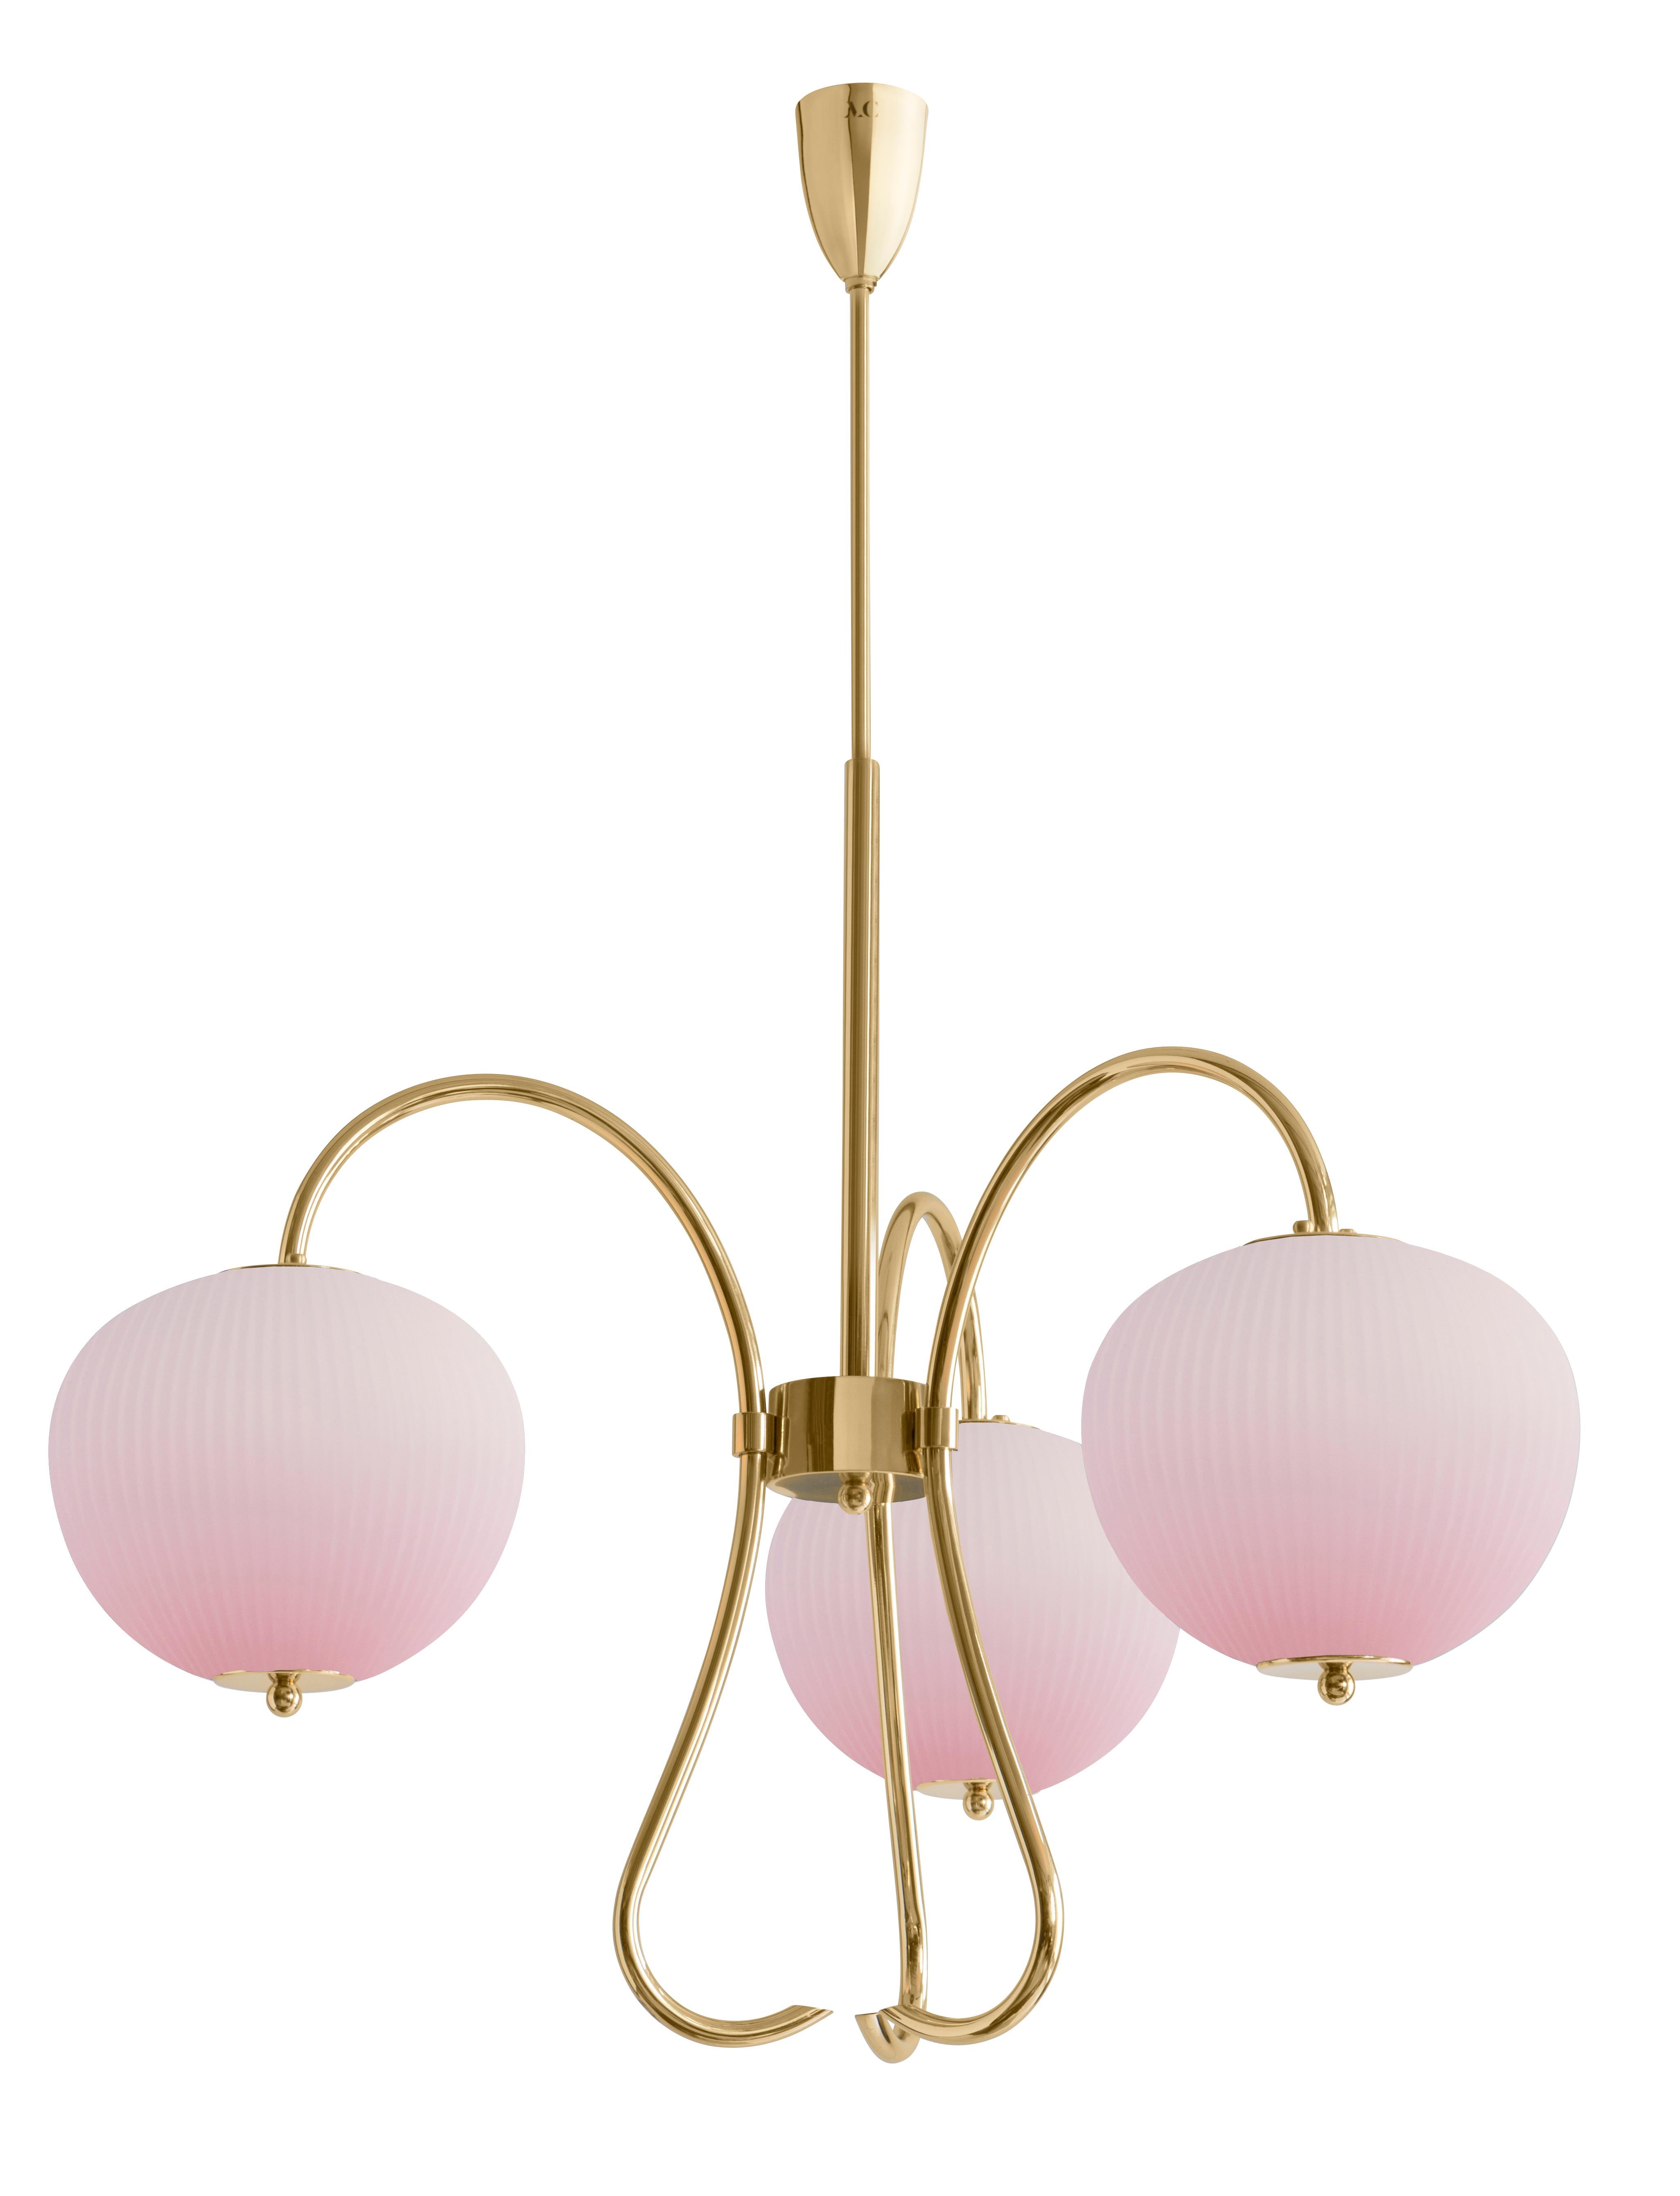 Triple chandelier China 03 by Magic Circus Editions
Dimensions: H 120 x W 81.5 x D 26.2 cm
Materials: Brass, mouth blown glass sculpted with a diamond saw
Colour: soft rose

Available finishes: Brass, nickel
Available colours: enamel soft